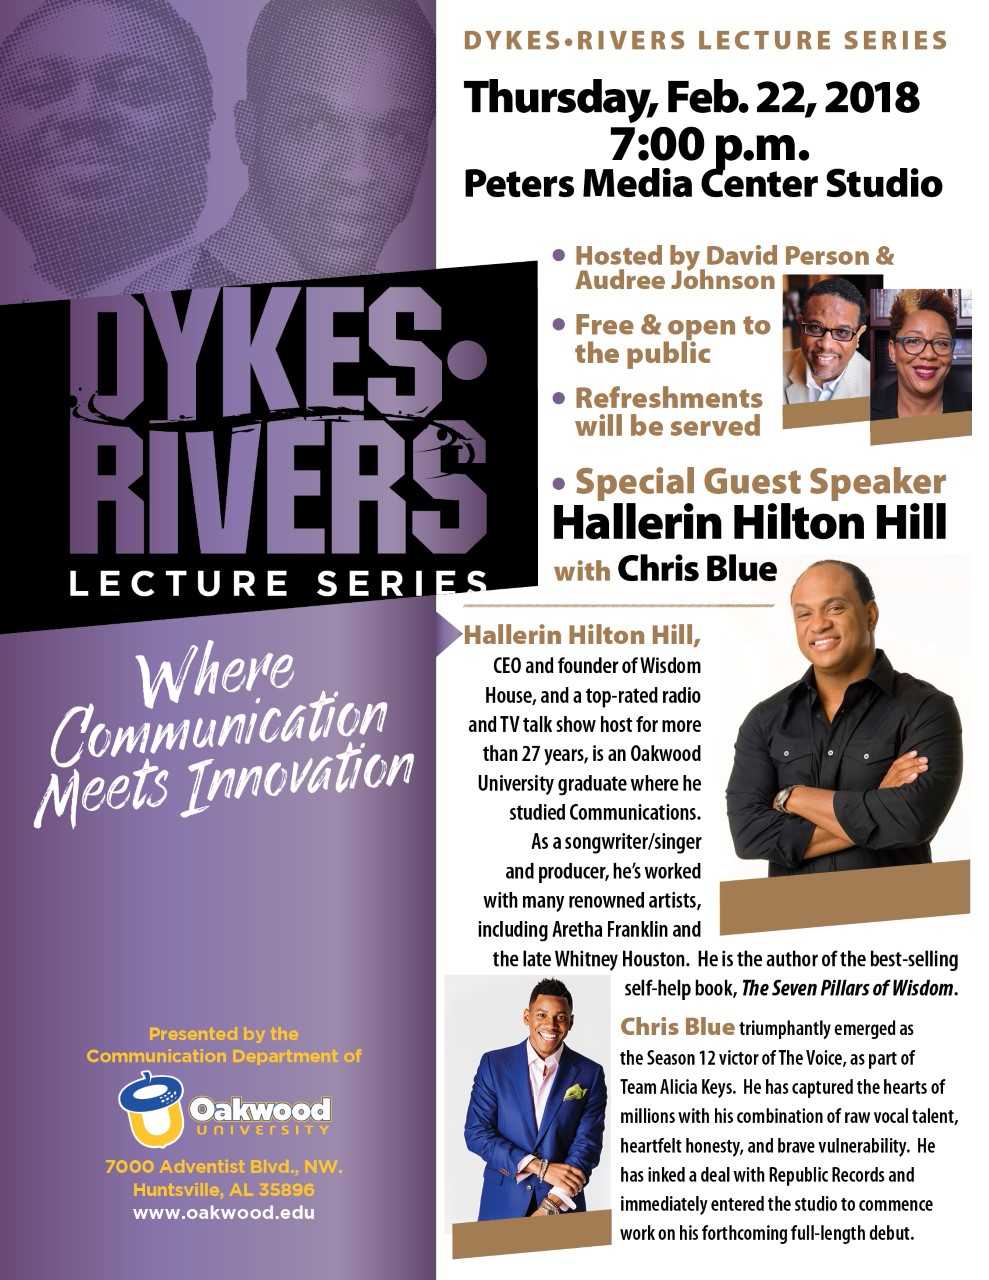 Dykes - Rivers Lecture Series featuring Hallerin Hilton Hill and Chris Blue